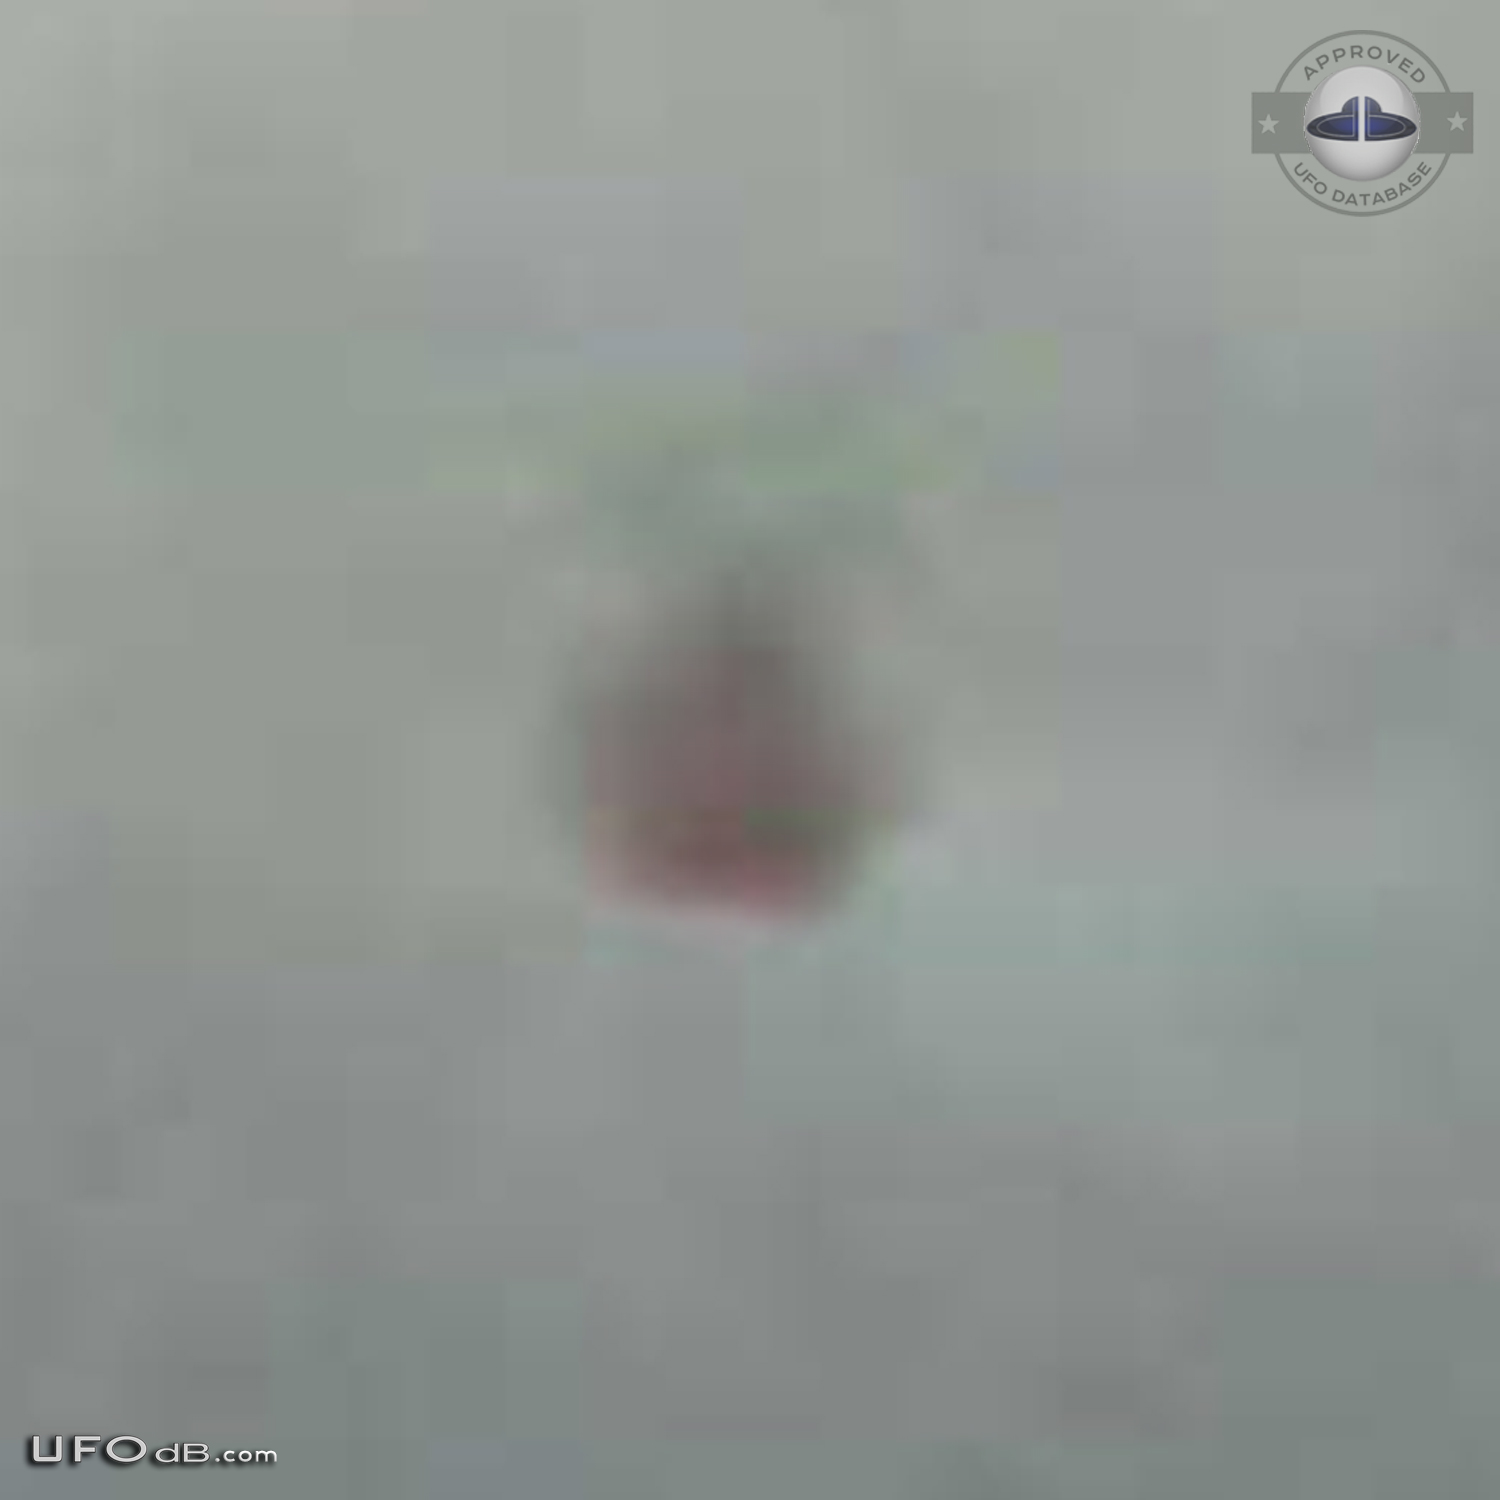 ufo picture taken on highway I-79 between Erie and Pittsburgh in 2011 UFO Picture #377-4